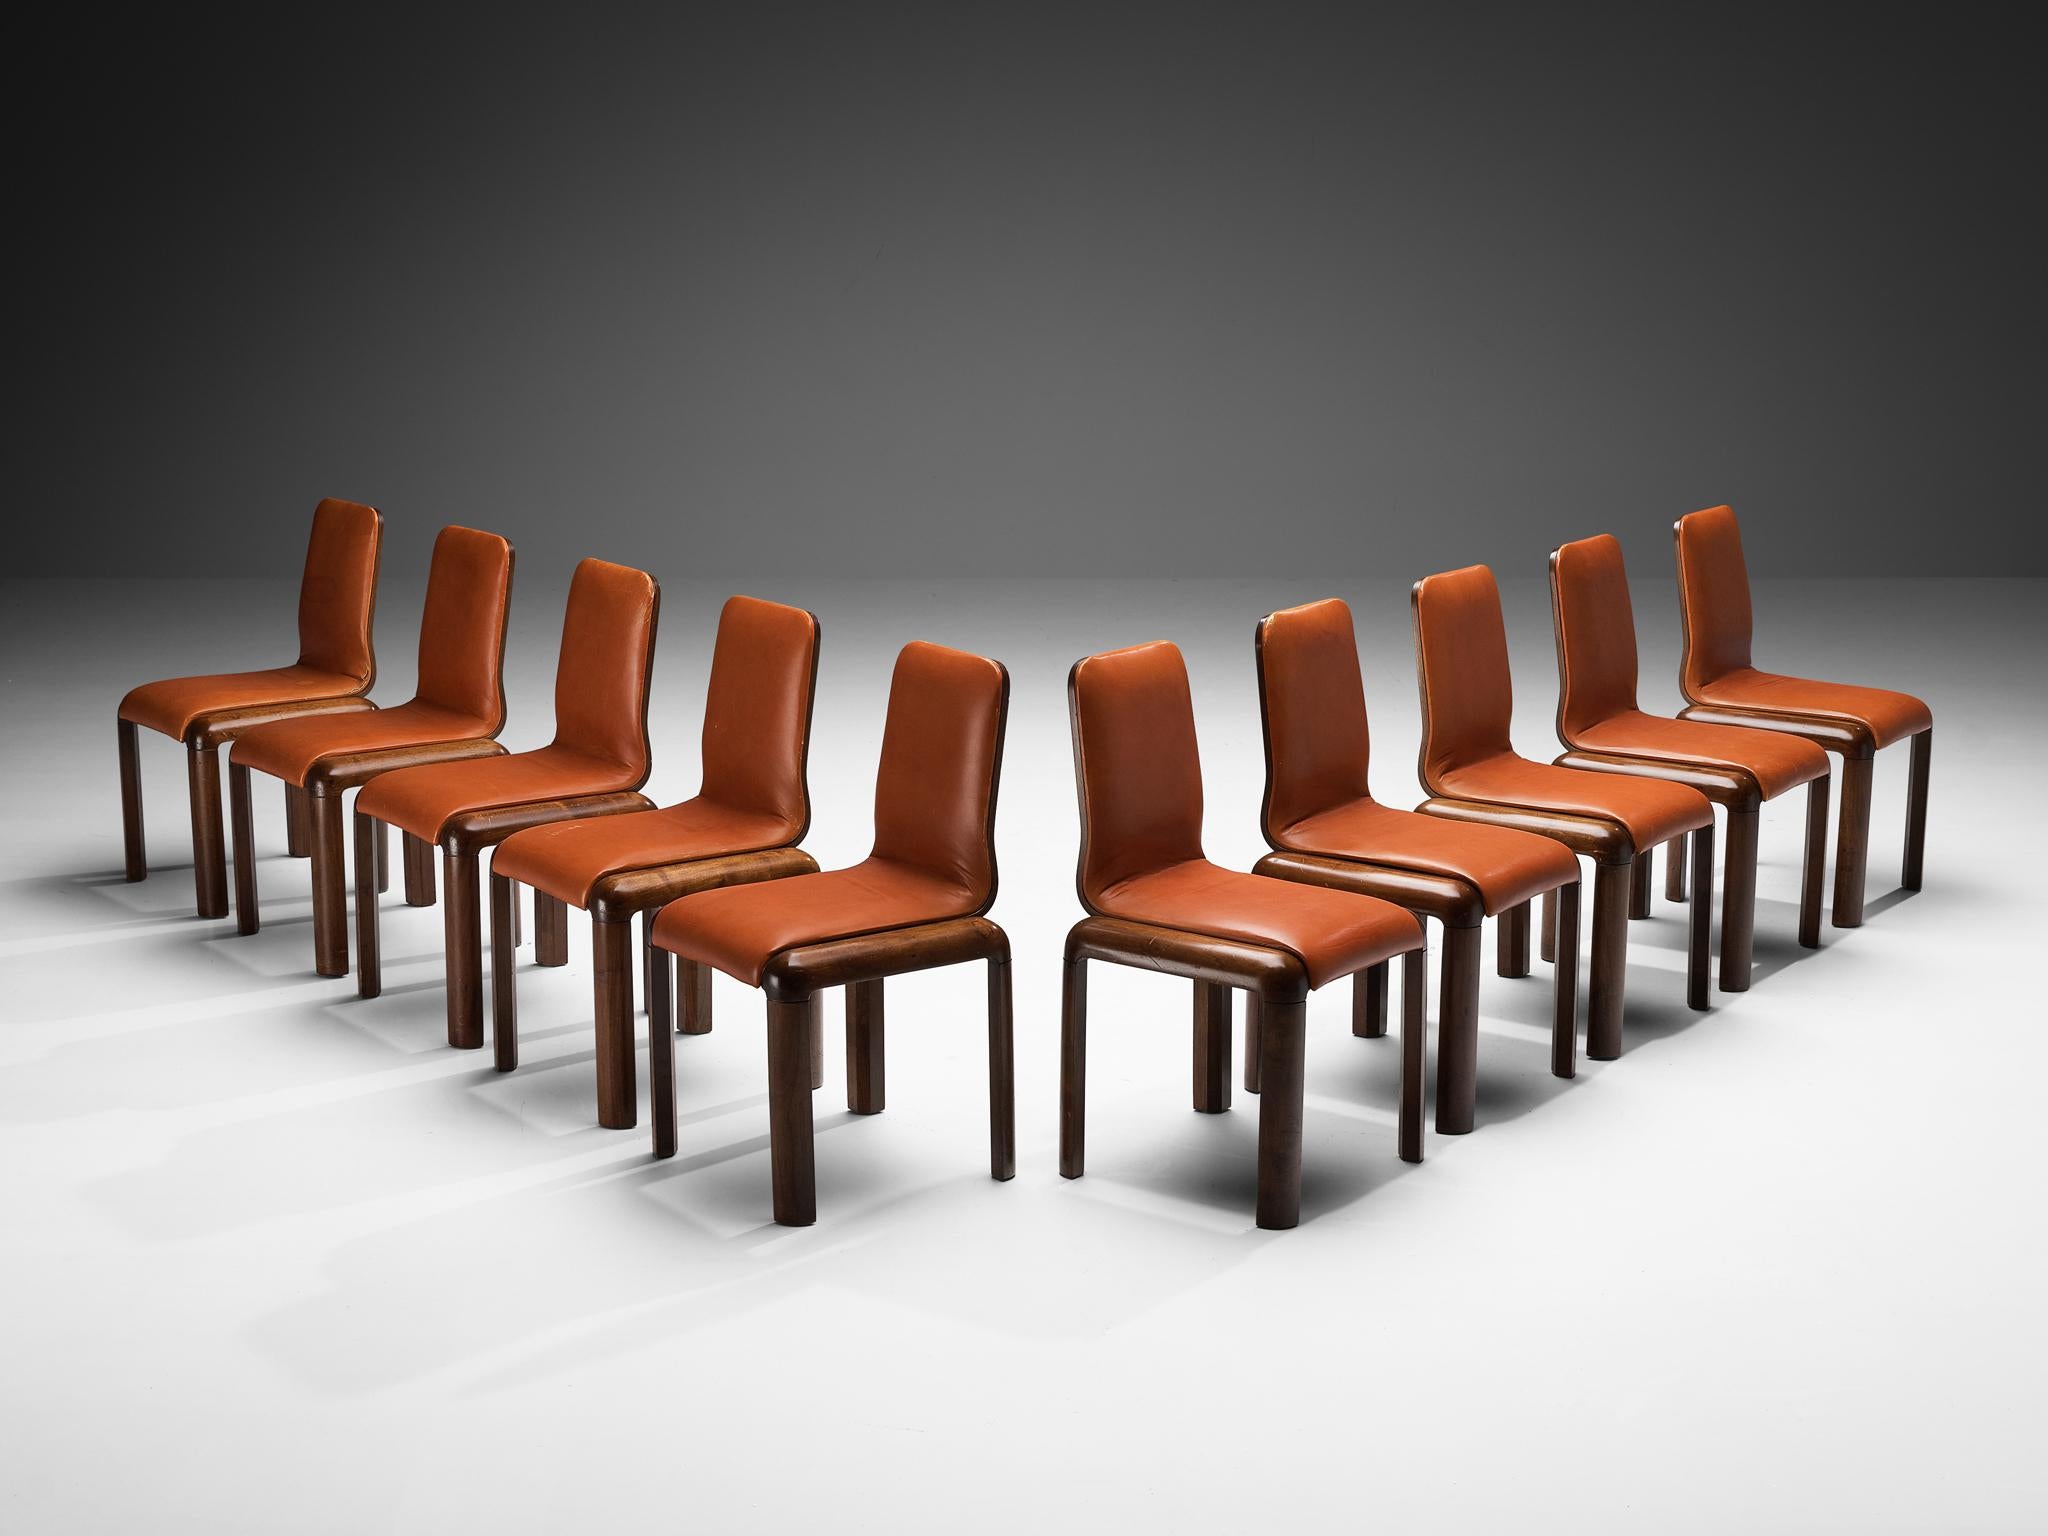 Set of ten dining chairs, leather, walnut, walnut plywood, Italy, 1970s

Beautifully constructed set of dining chairs featuring a streamlined design with an open construction. The backrest embraces a gentle curve, particularly noticeable from a side